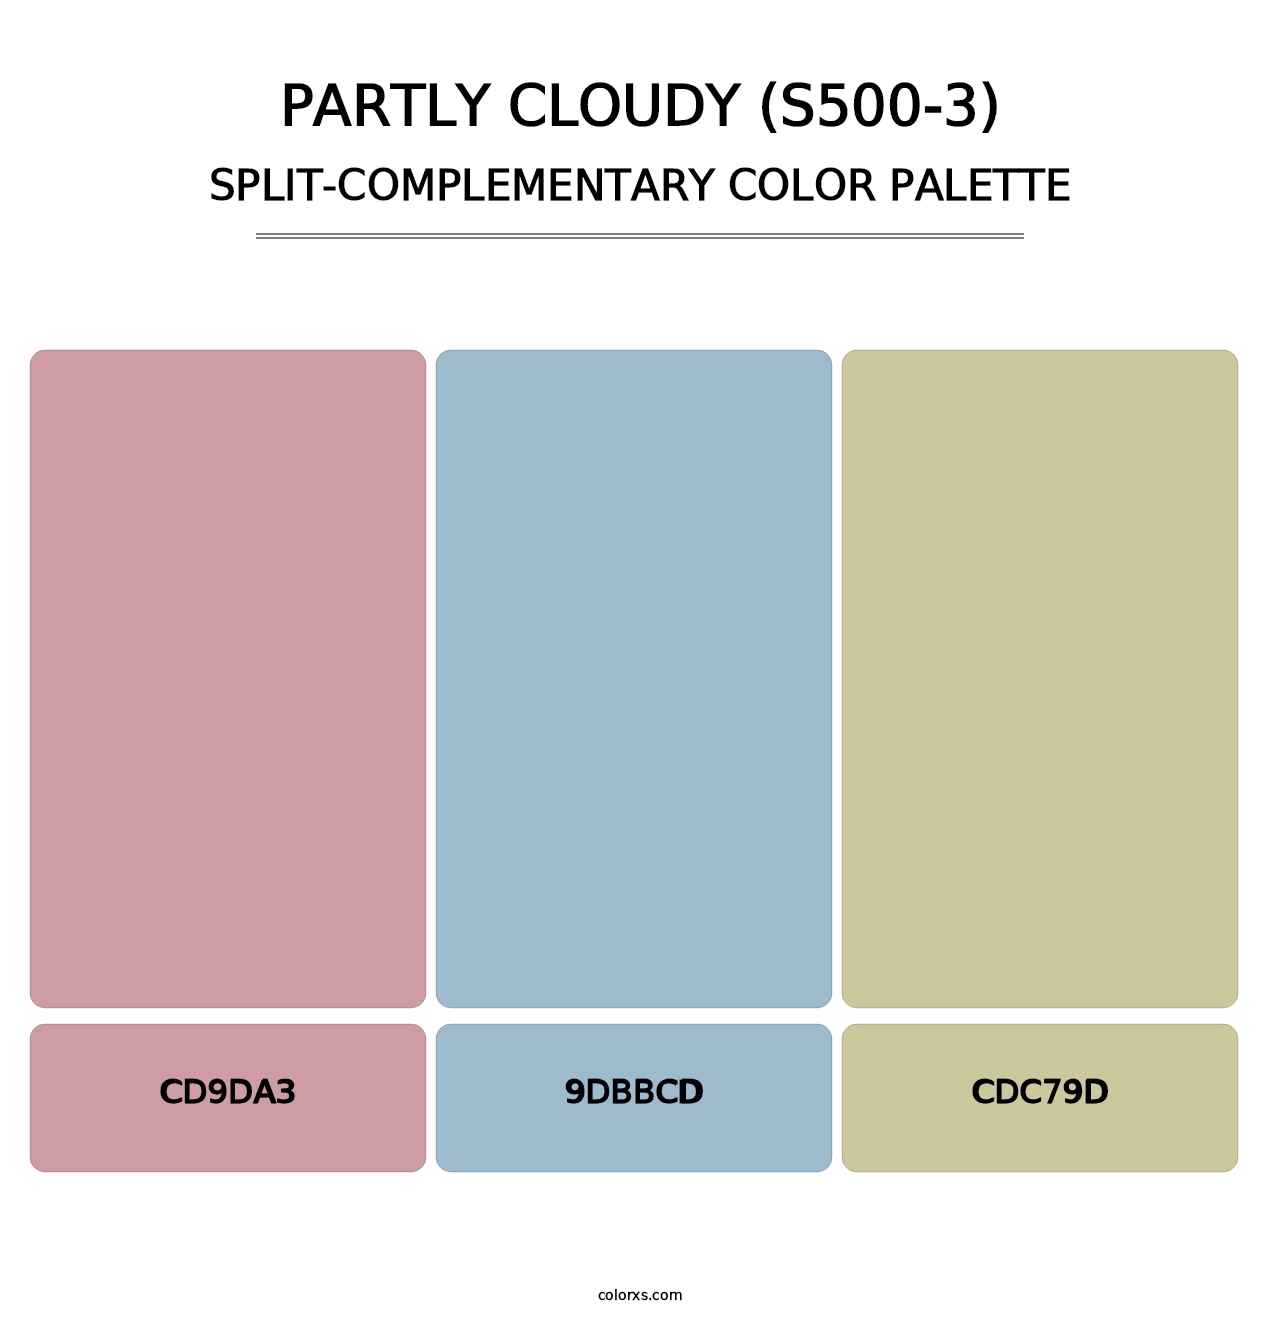 Partly Cloudy (S500-3) - Split-Complementary Color Palette